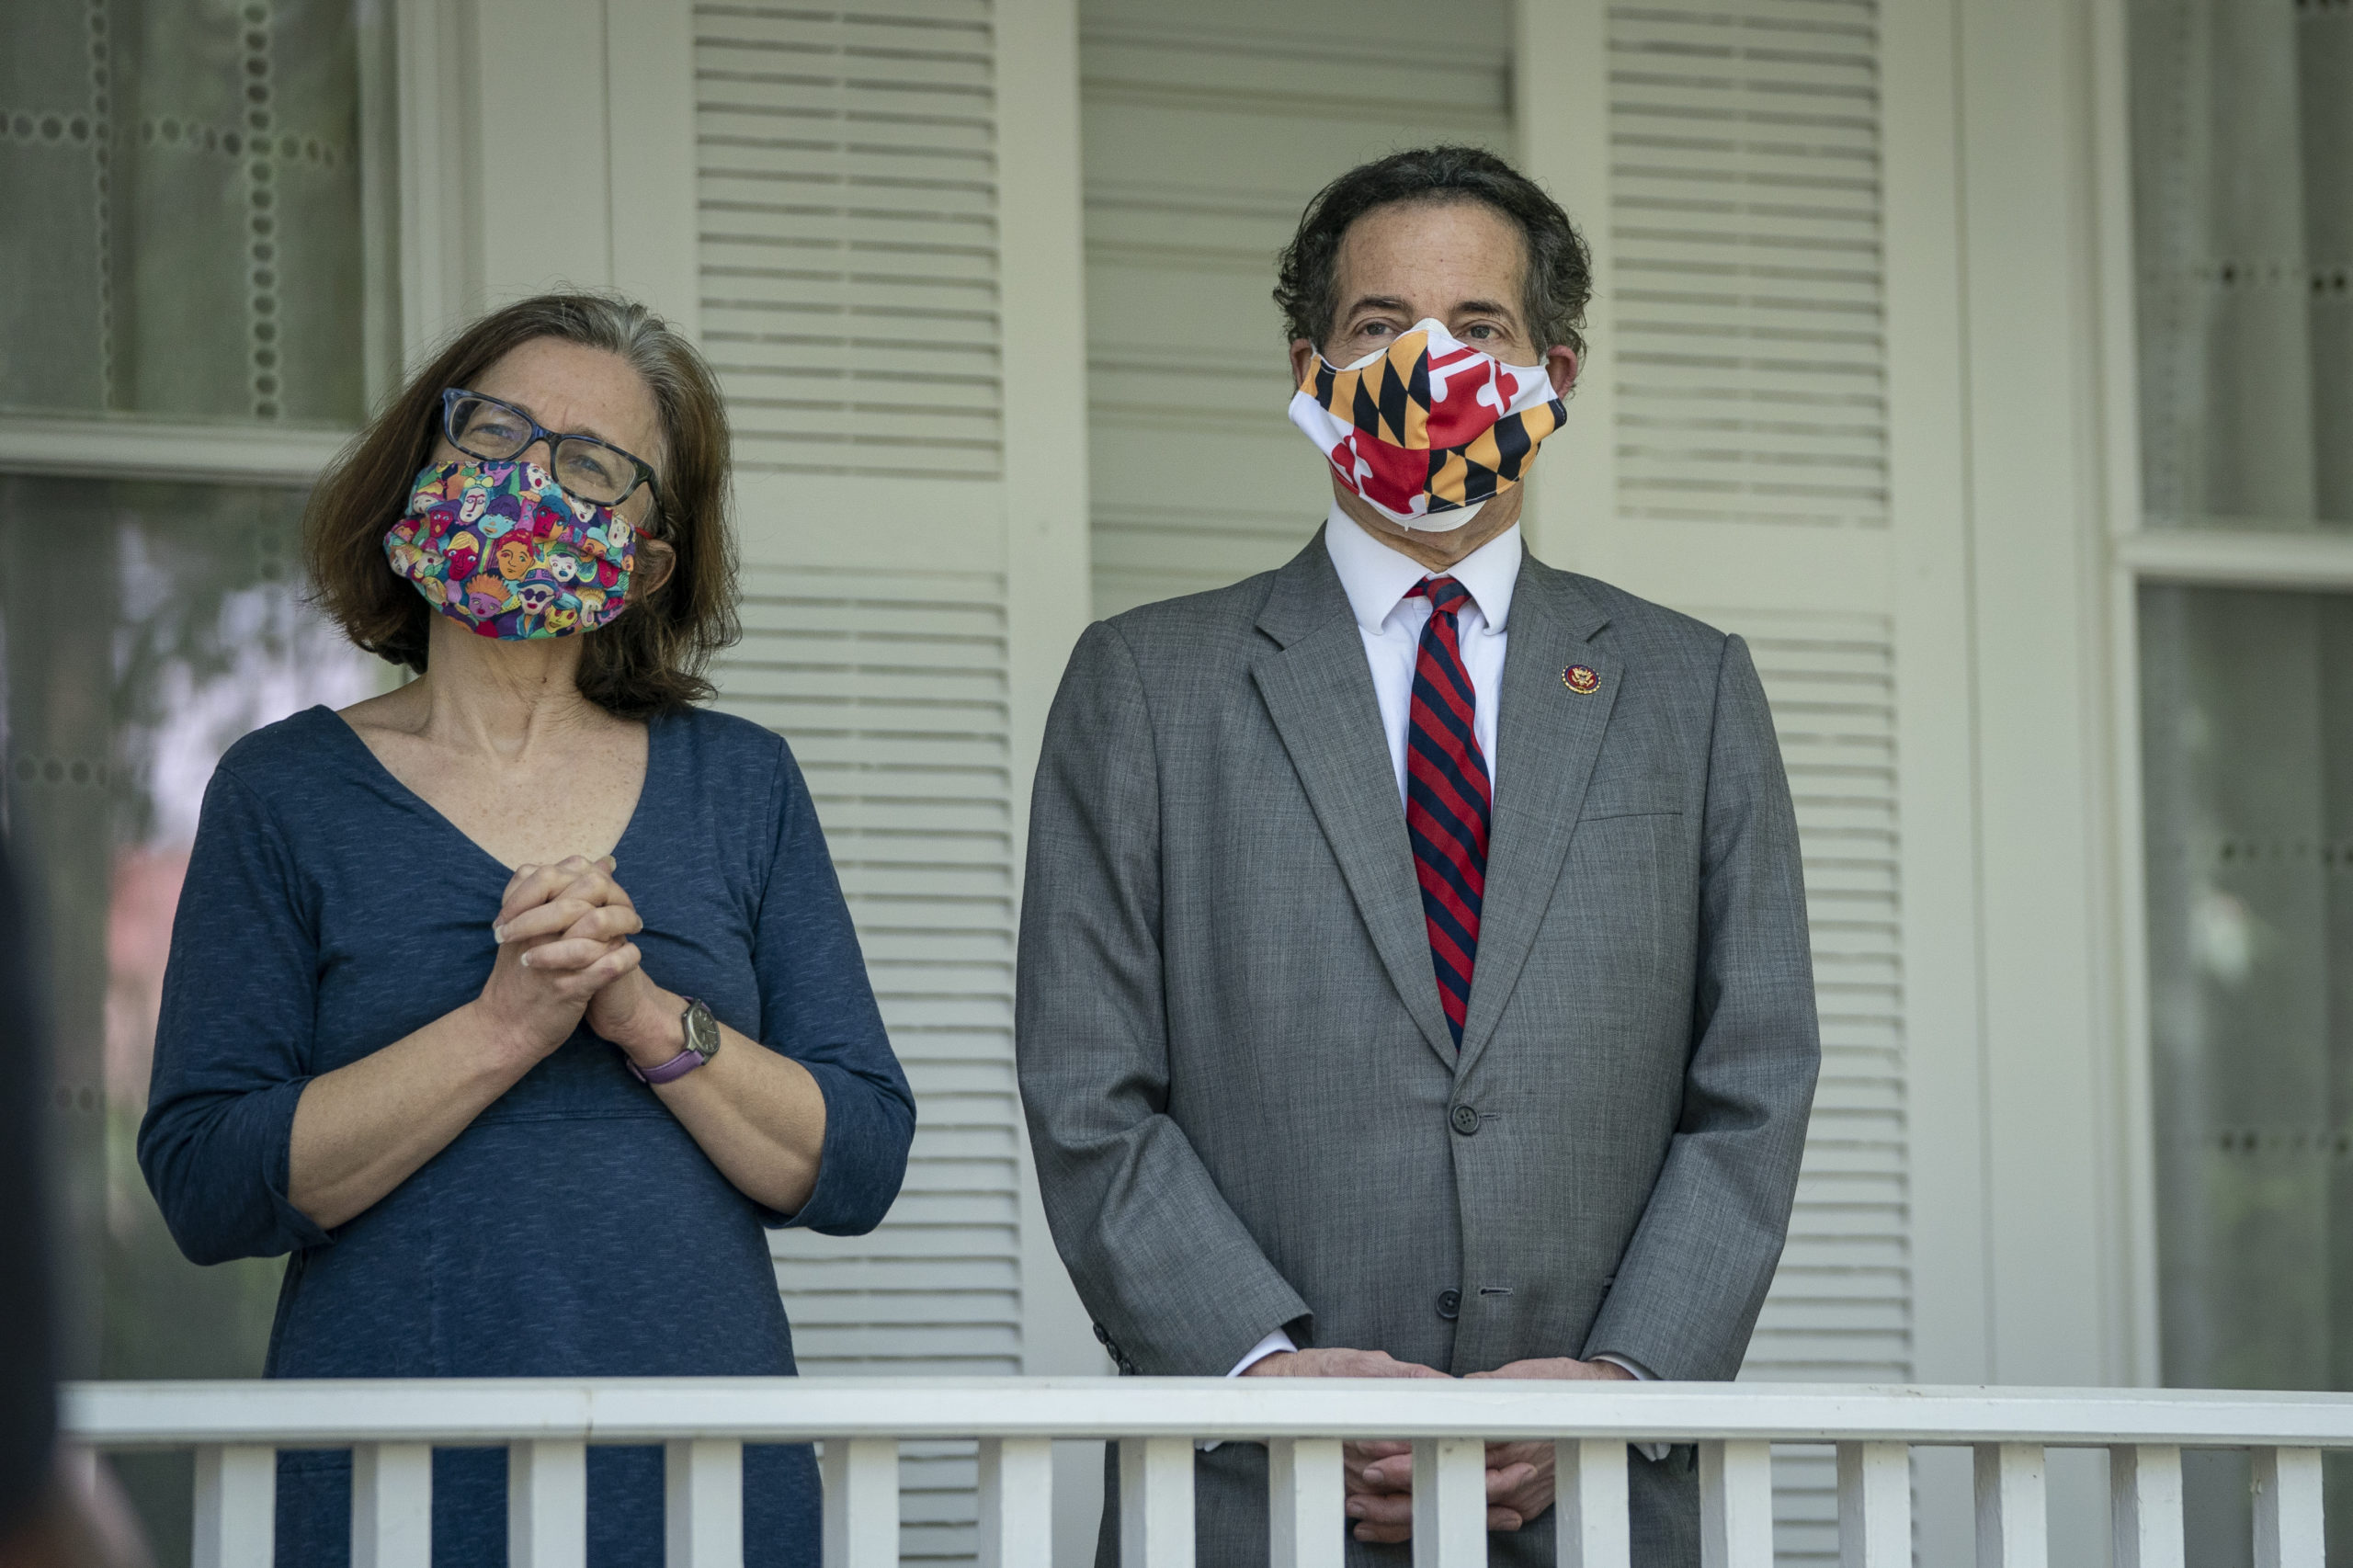 TAKOMA PARK, MD - MAY 04: (L-R) Sarah Bloom Raskin and U.S. Rep. Jamie Raskin (D-MD) listen as a group of Maryland residents, calling themselves the 'Pandemic Comforters,' sing in the front yard of his home on May 4, 2020 in Takoma Park, Maryland. The singers wanted to use the nice weather to show gratitude to Rep. Raskin for his work in Congress and offer their prayers during the coronavirus pandemic. Last week, Rep. Raskin was appointed by Speaker of the House Nancy Pelosi to the newly created House Select Committee On Coronavirus. (Photo by Drew Angerer/Getty Images)